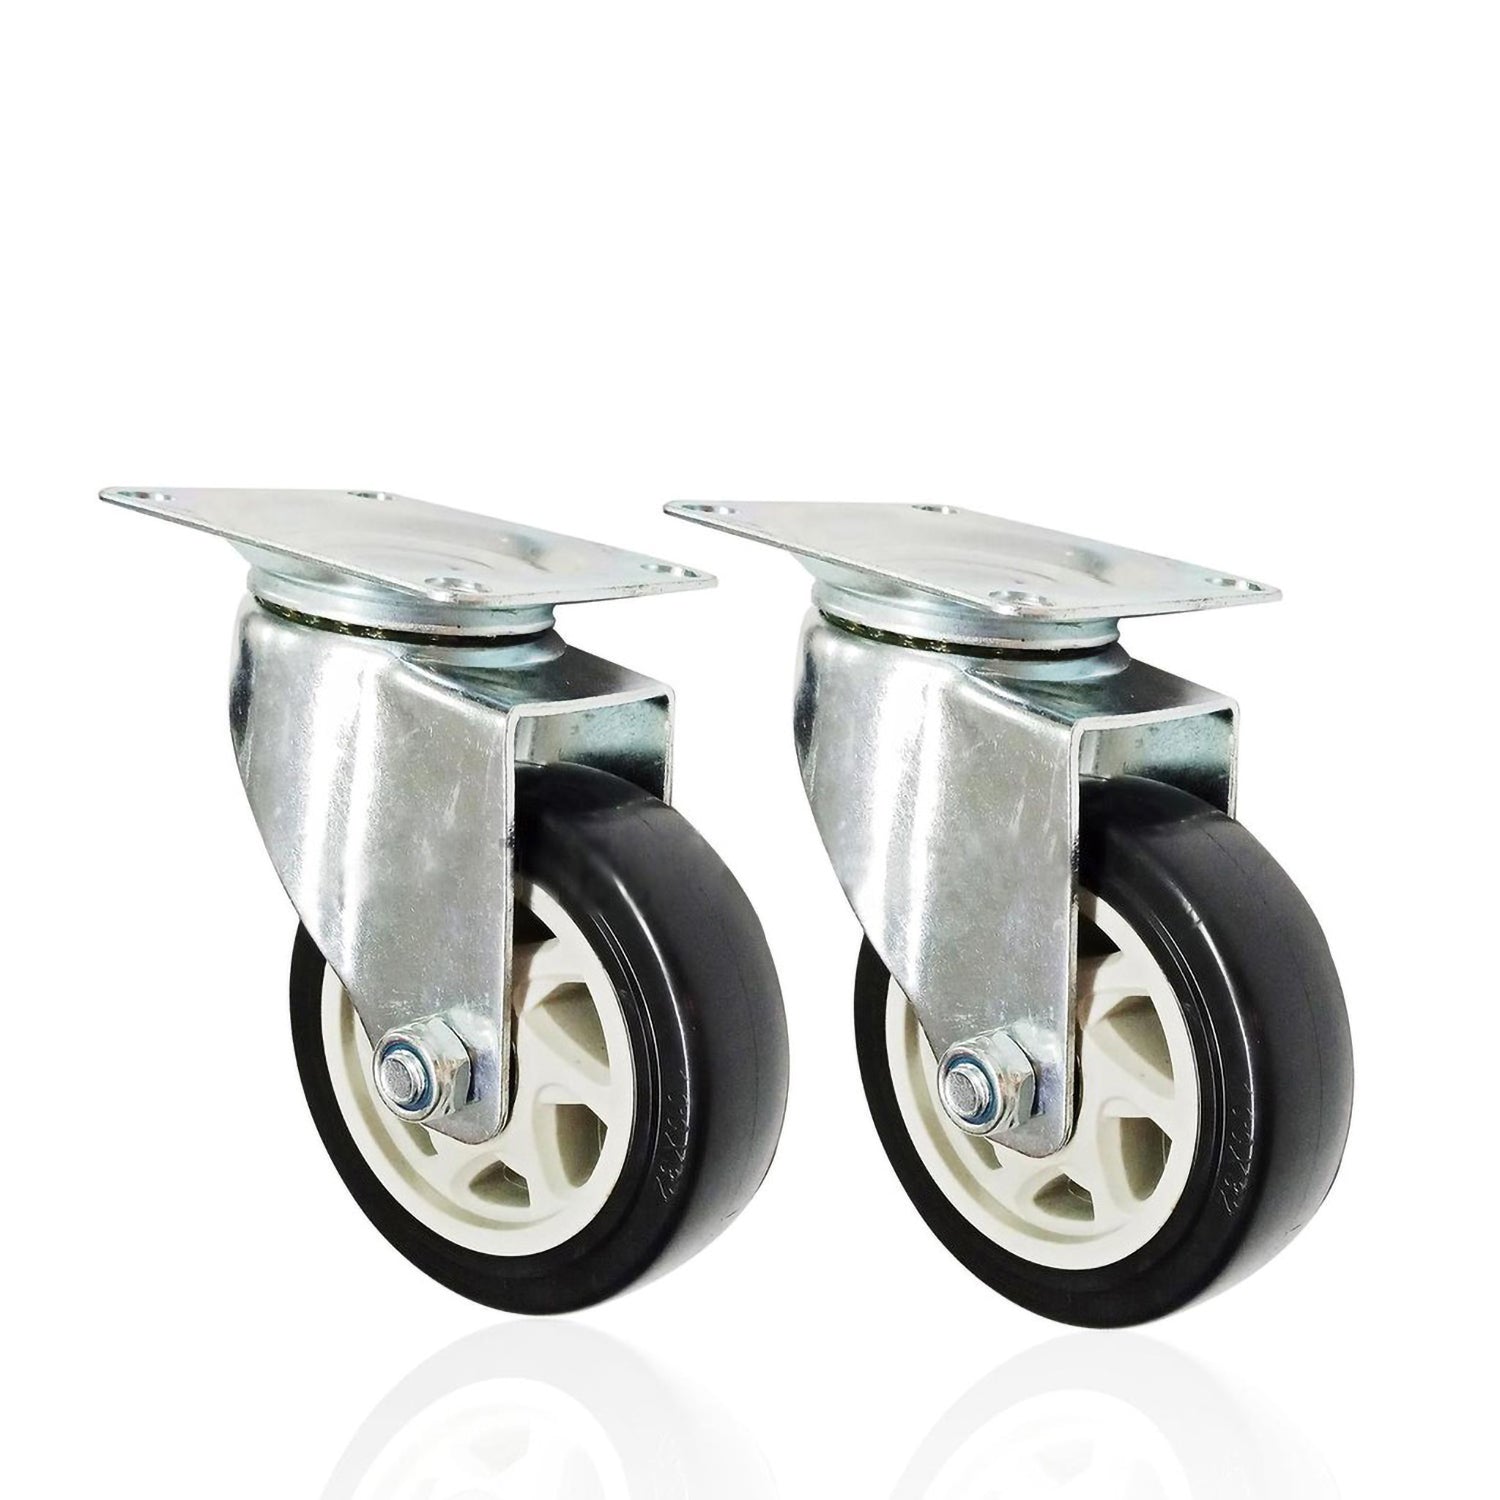 300KG Trolley 5 INCH PU Caster Wheels Front and Rear Wheels Default OEM 